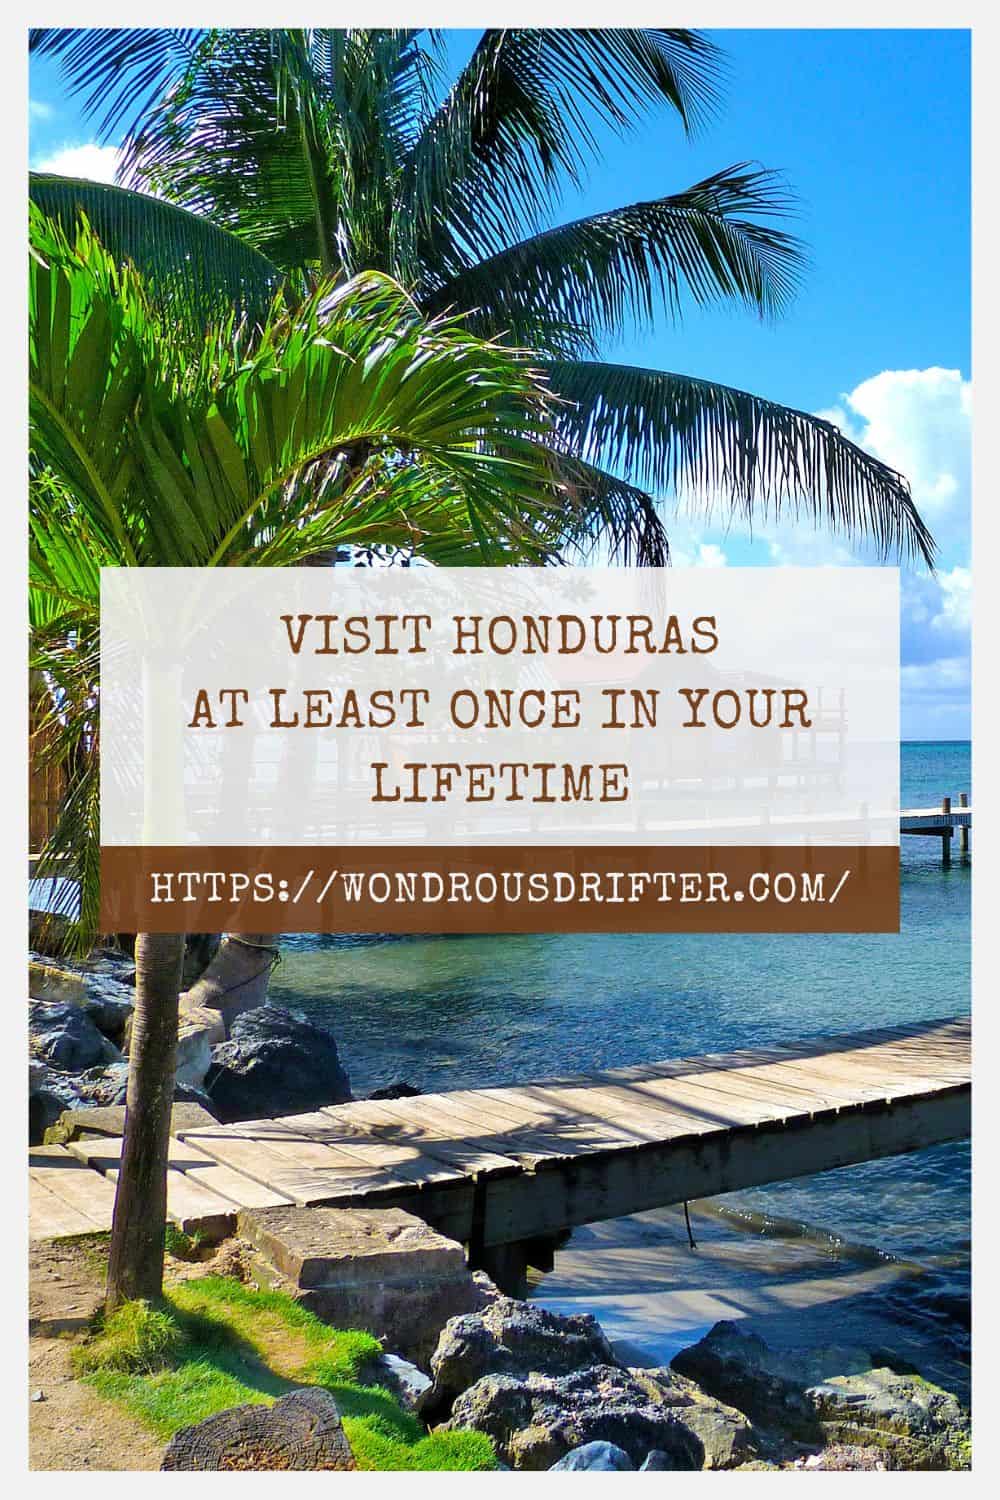 Visit Honduras at least once in your lifetime